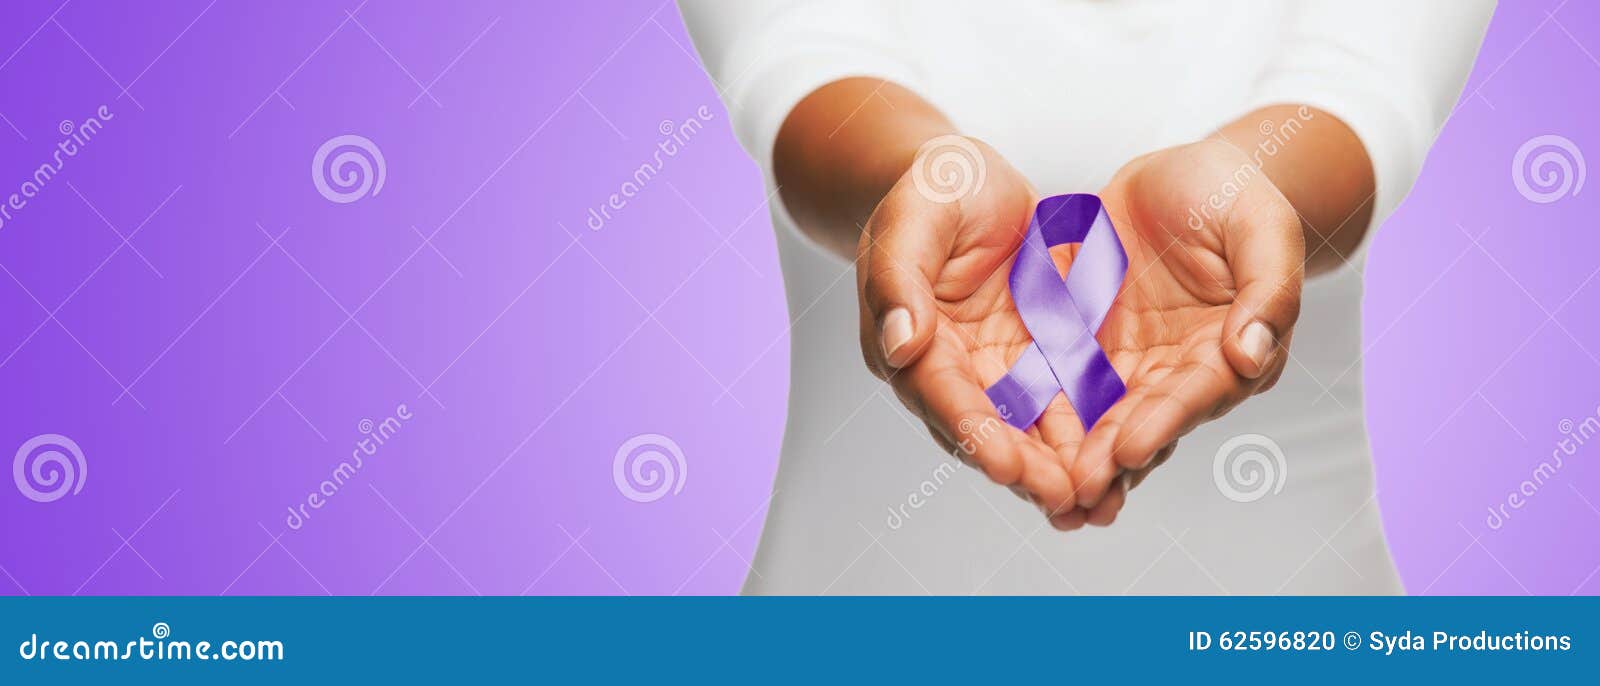 close up of hands holding purple awareness ribbon